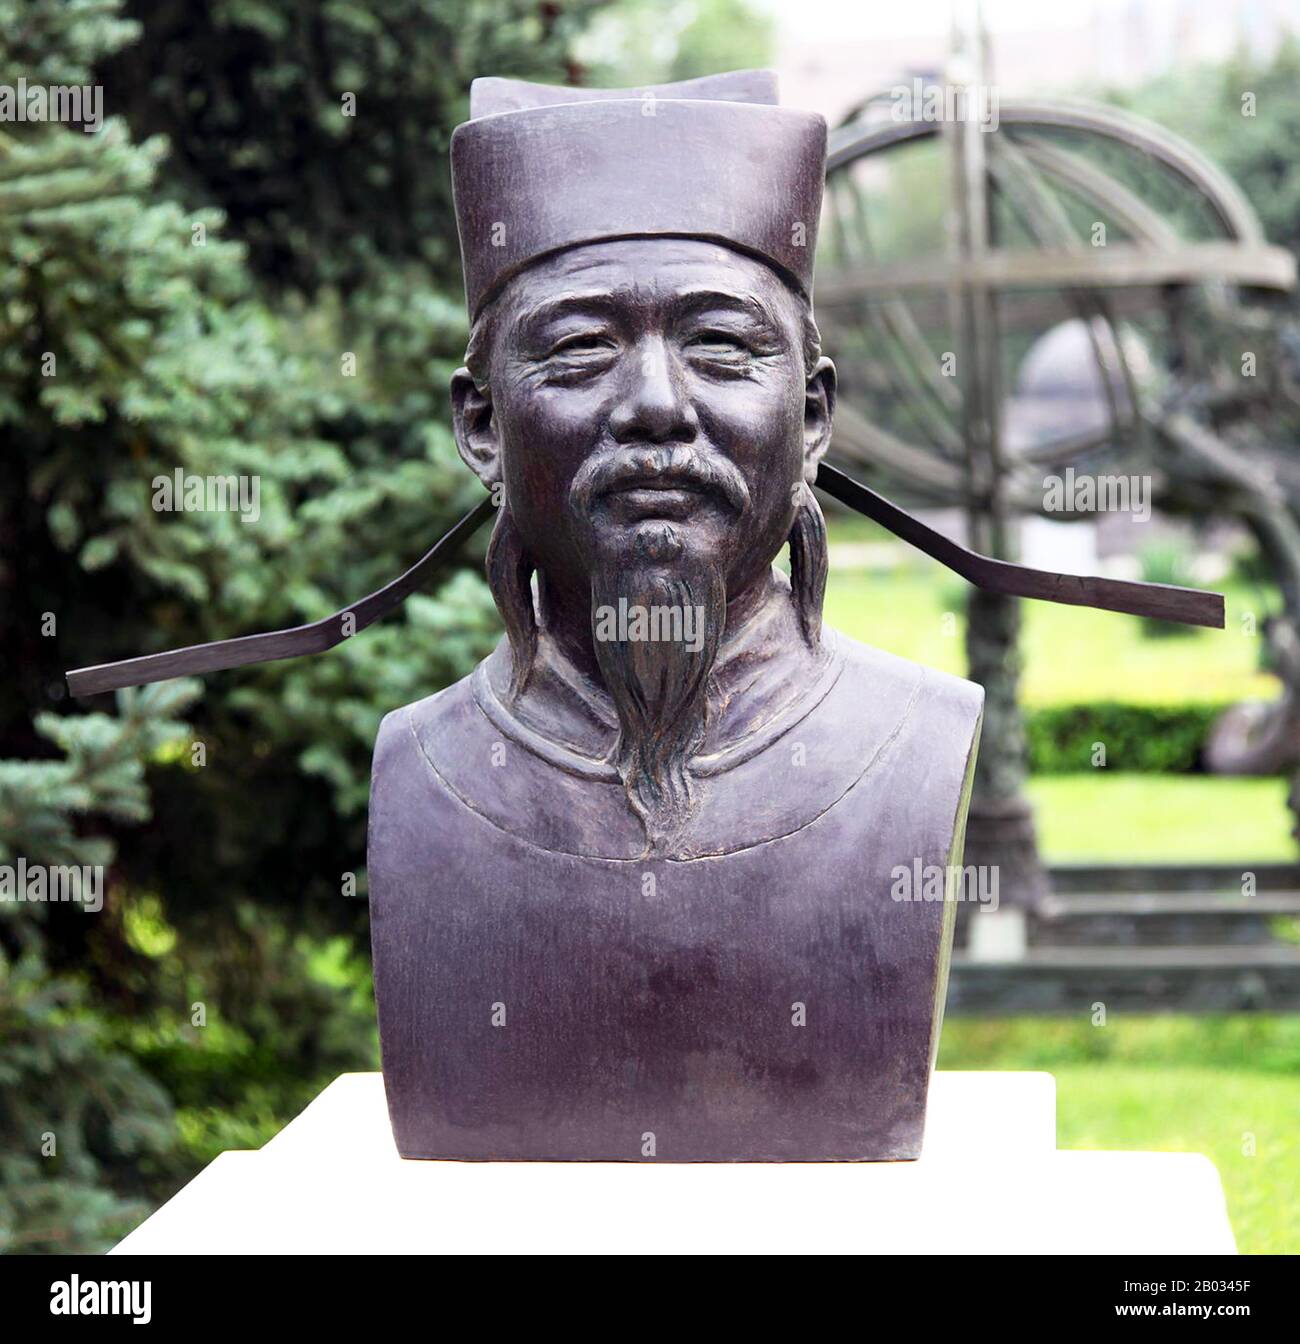 Shen Kuo (1031–1095), courtesy name Cunzhong and pseudonym Mengxi Weng, was a Han Chinese polymathic scientist and statesman of the Song dynasty (960–1279).  Excelling in many fields of study and statecraft, he was a mathematician, astronomer, meteorologist, geologist, zoologist, botanist, pharmacologist, agronomist, archaeologist, ethnographer, cartographer, encyclopedist, general, diplomat, hydraulic engineer, inventor, academy chancellor, finance minister, governmental state inspector, poet, and musician.  He was the head official for the Bureau of Astronomy in the Song court, as well as an Stock Photo